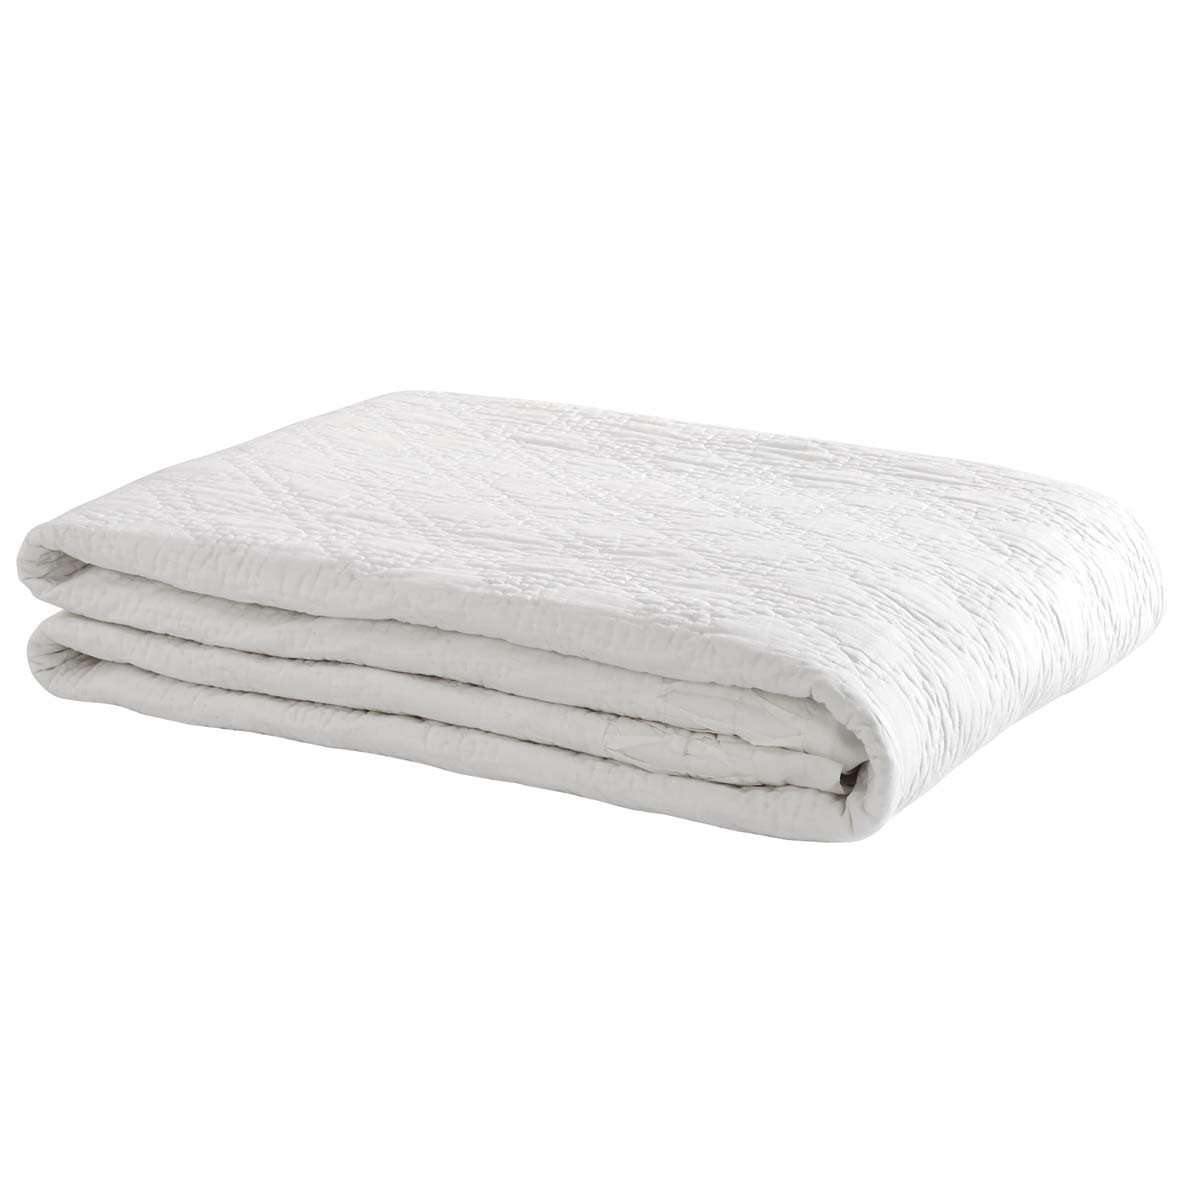 Adelia White Queen Quilt 90Wx90L VHC Brands folded